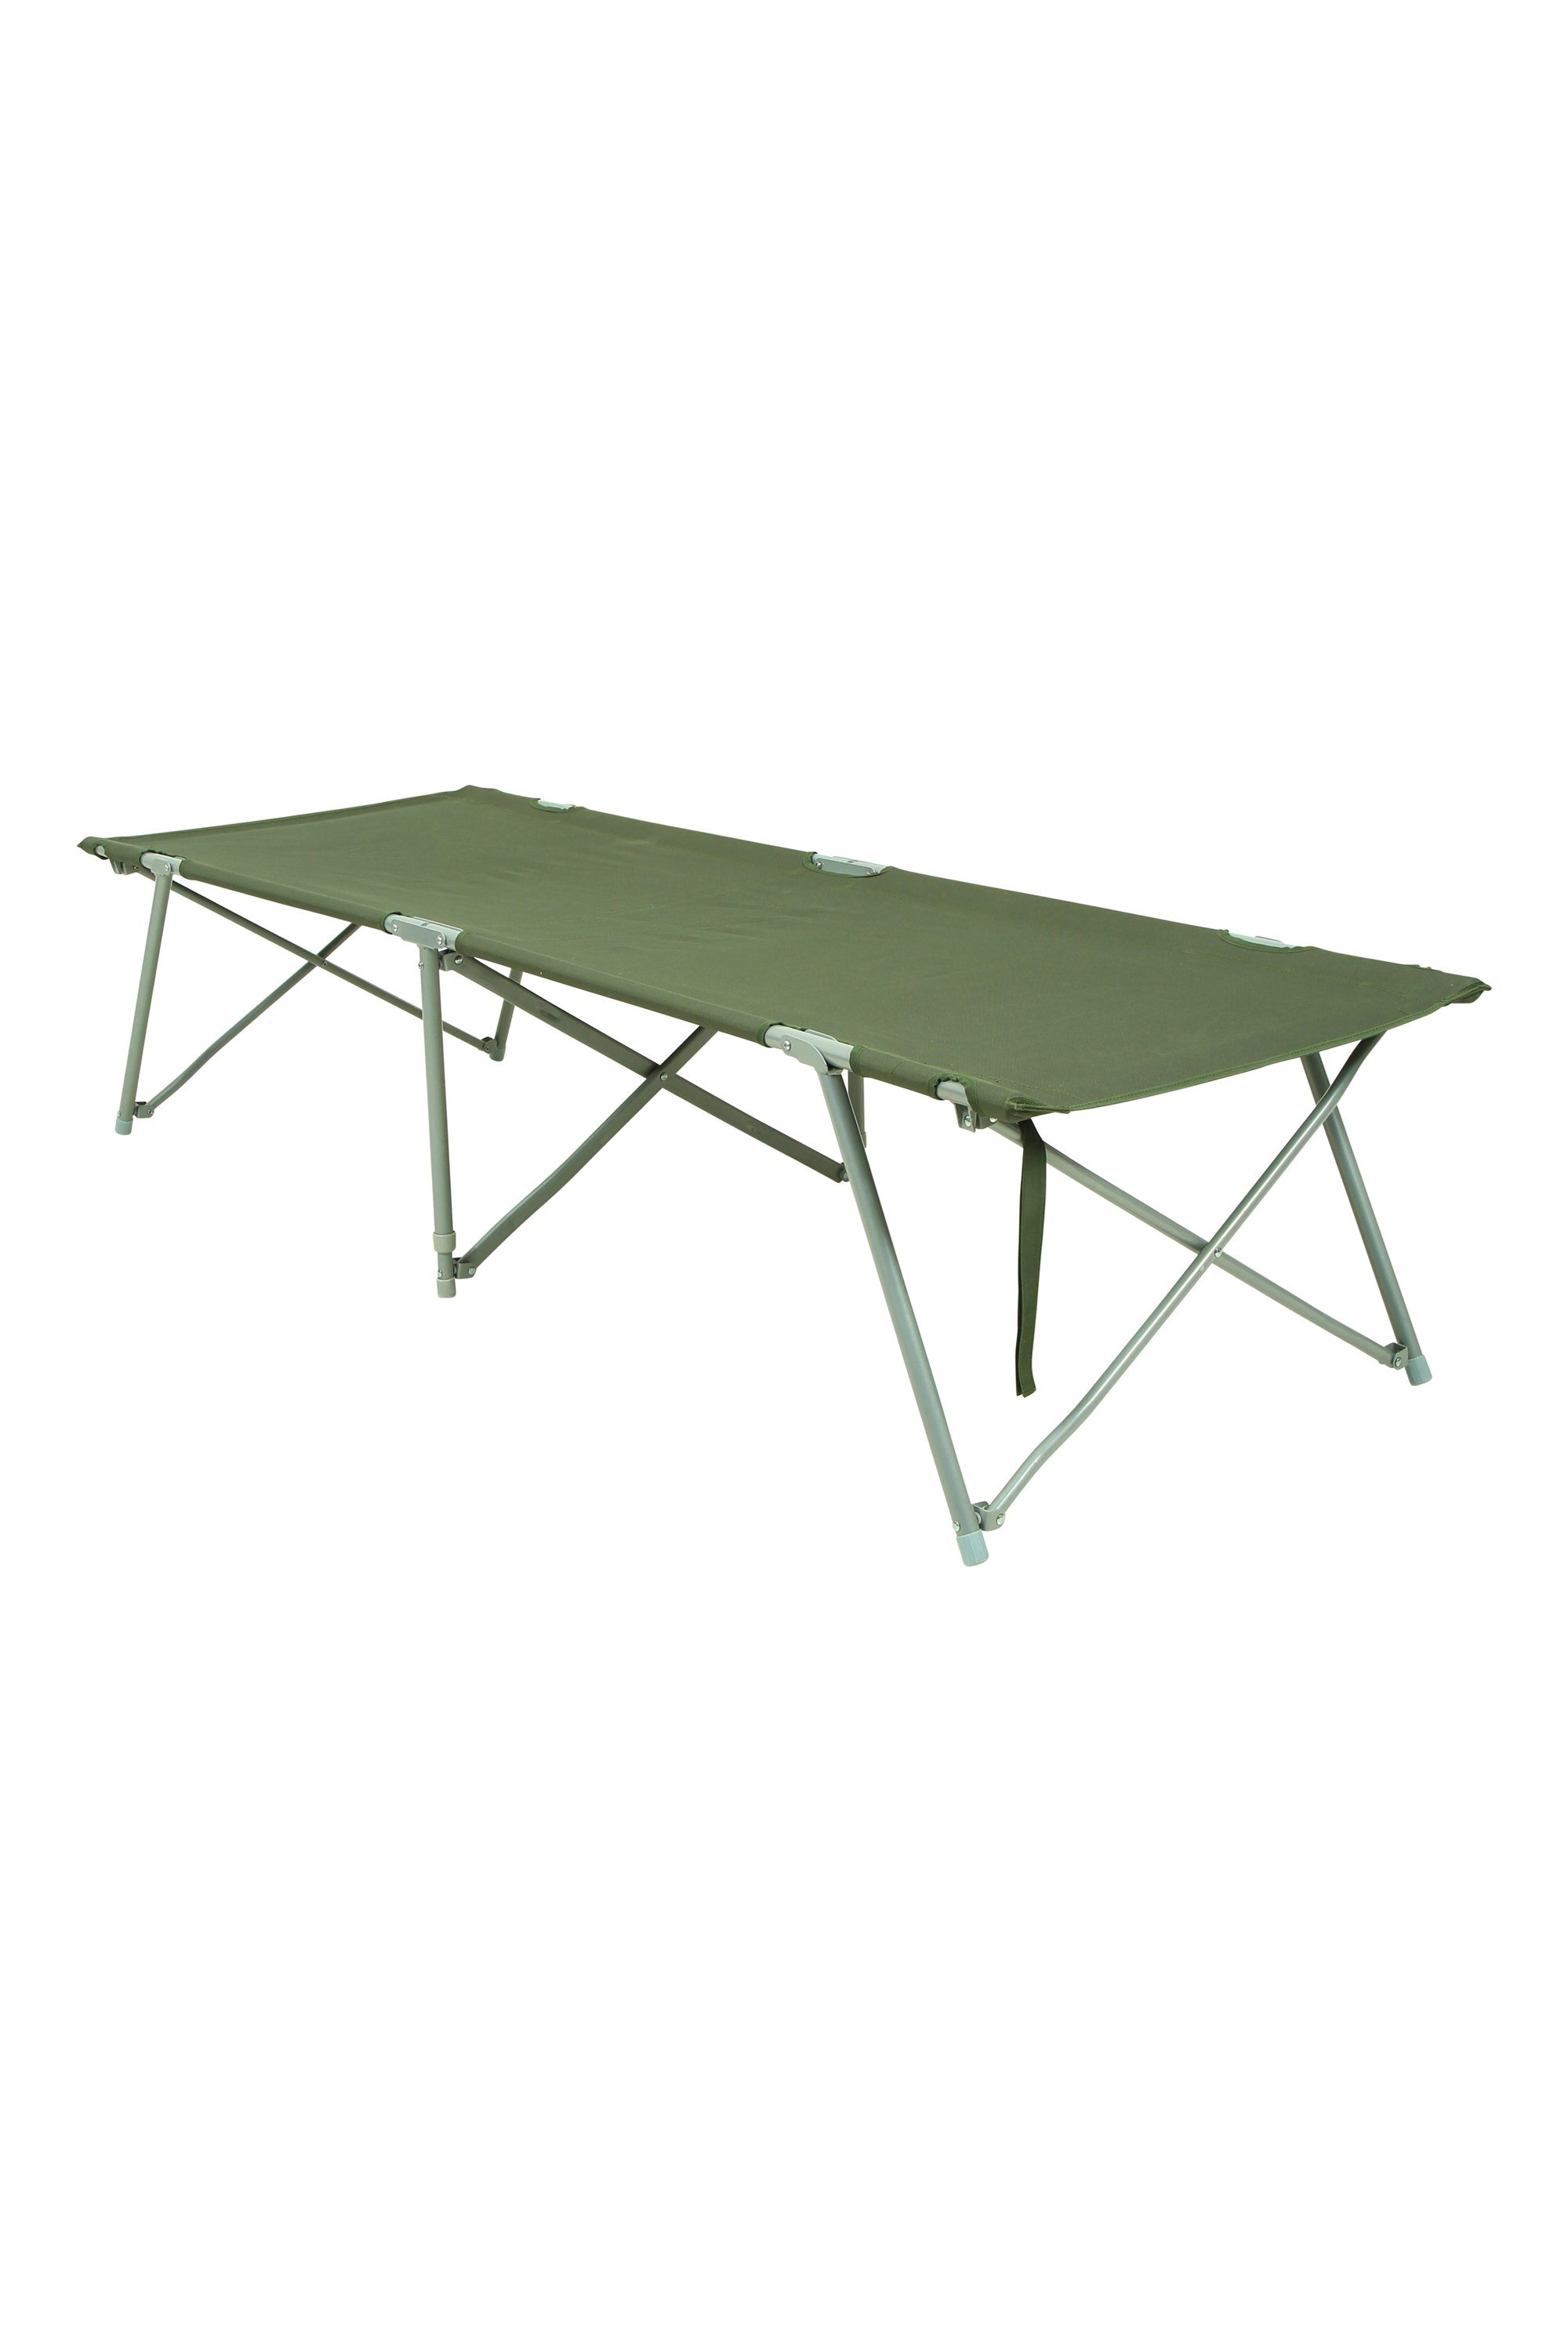 Ultra Folding Camp Bed - Green